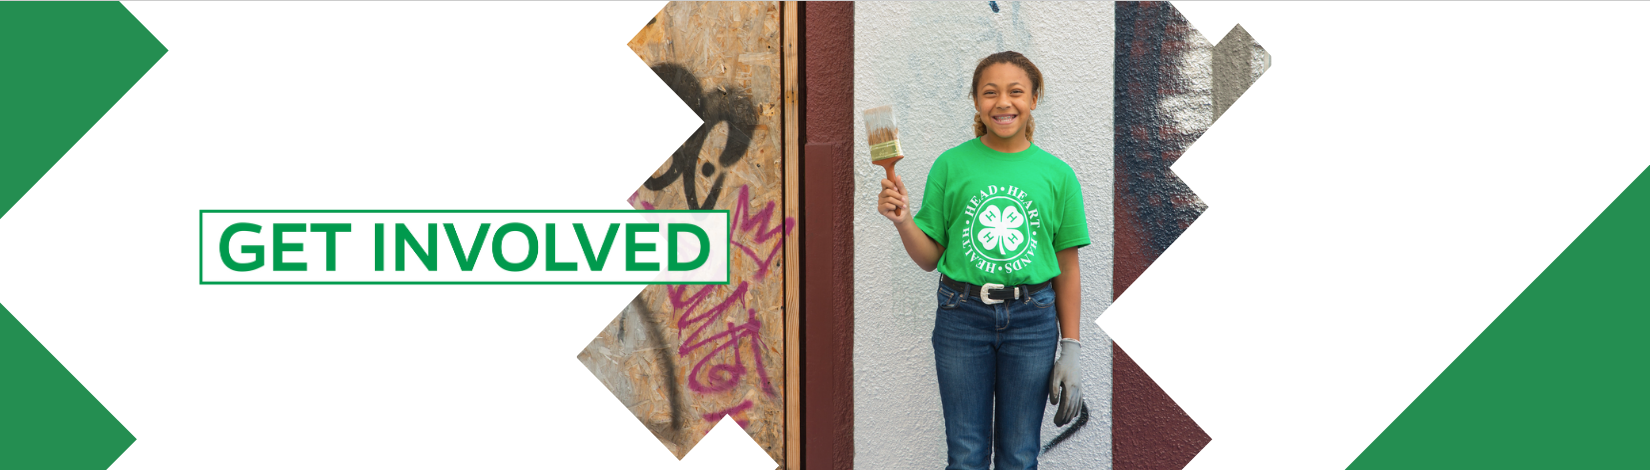 Volunteer 4-H youth smiling with paint brush.